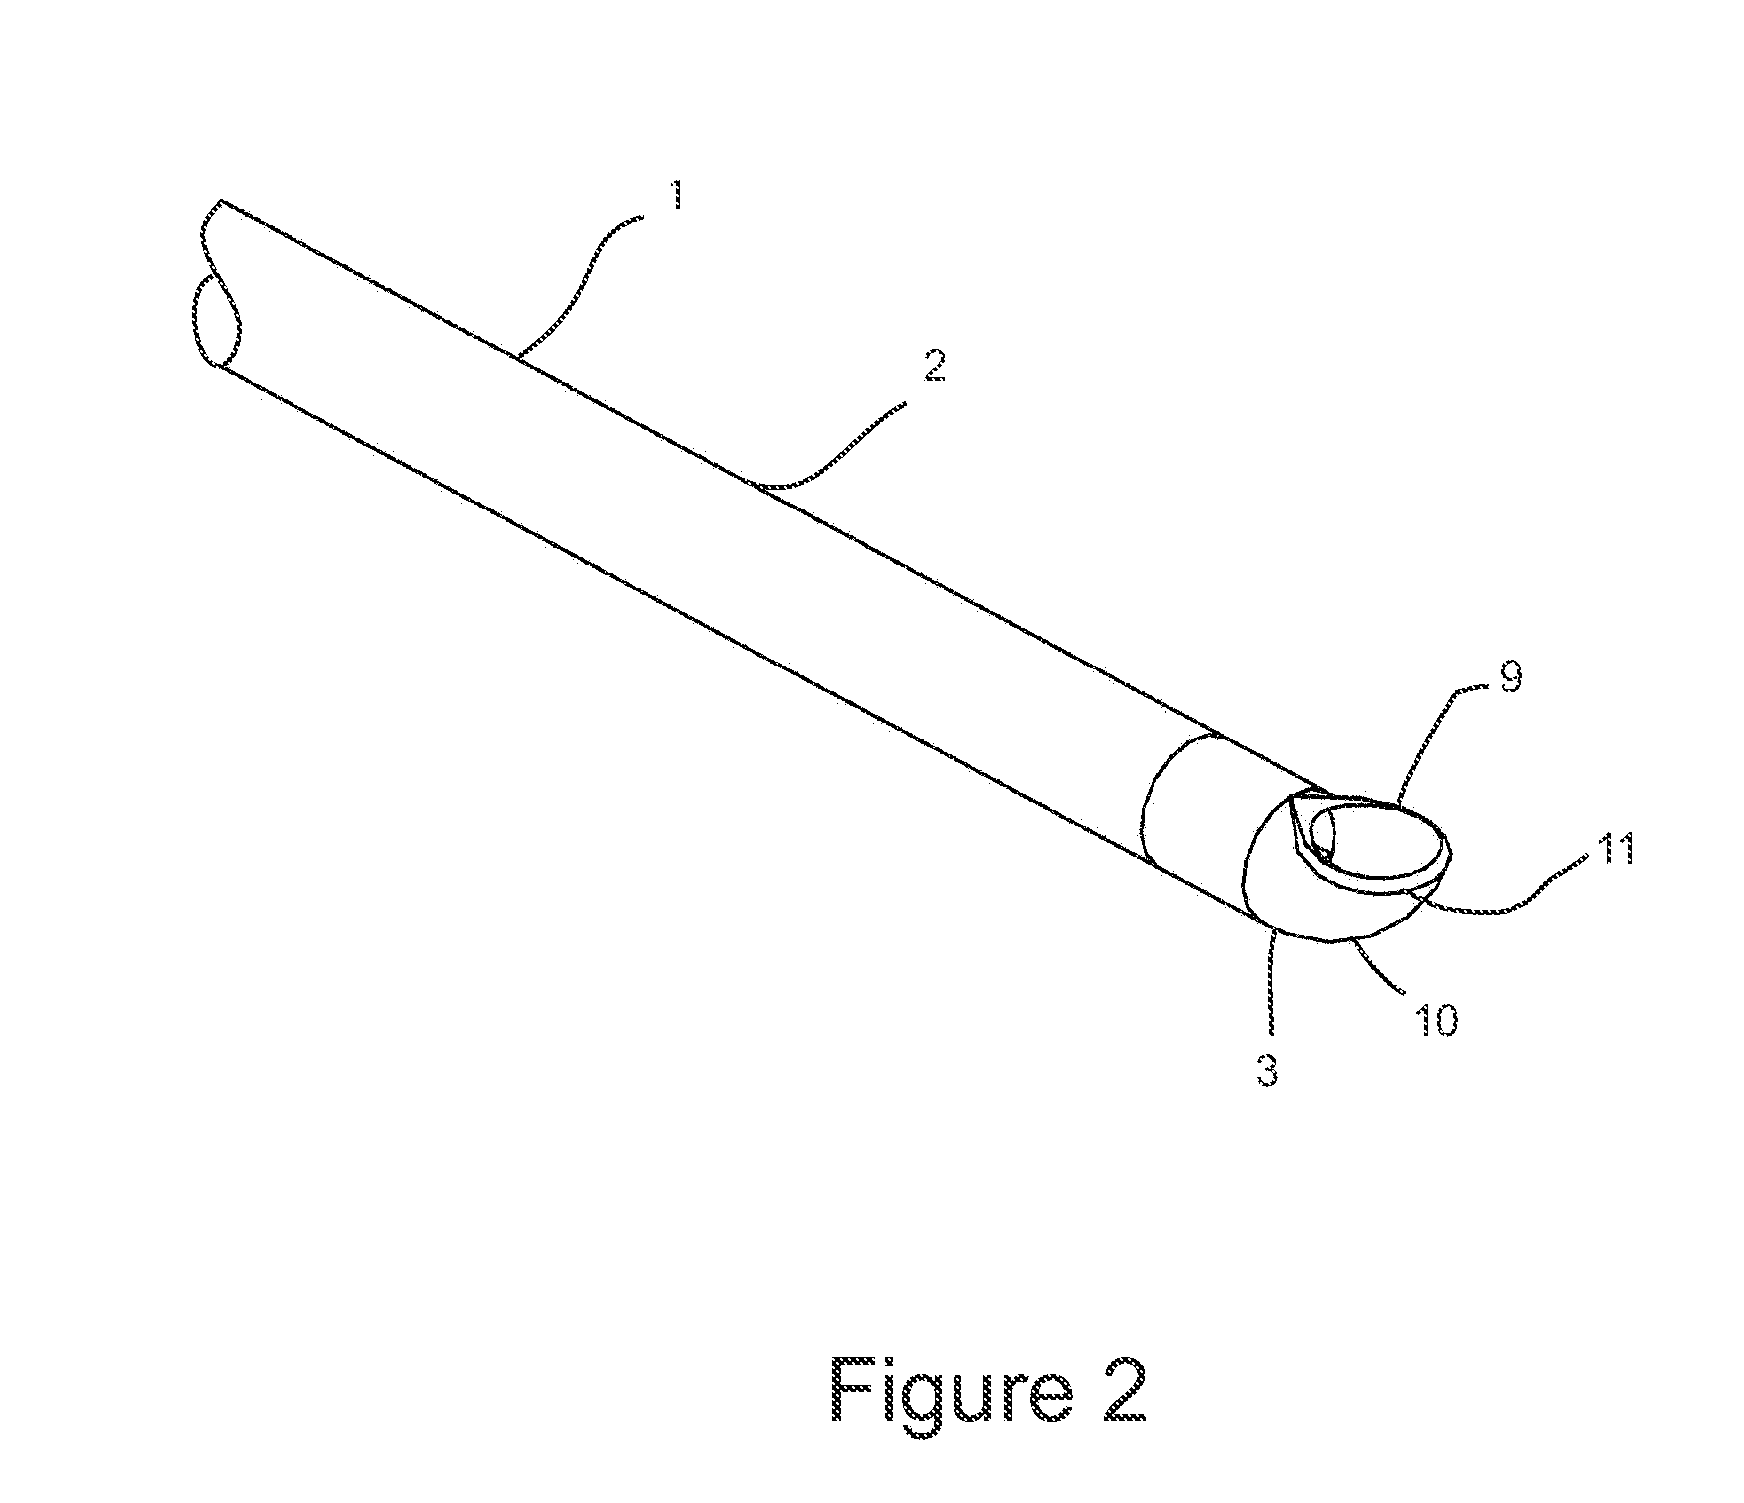 Direct vision cryosurgical probe and methods of use